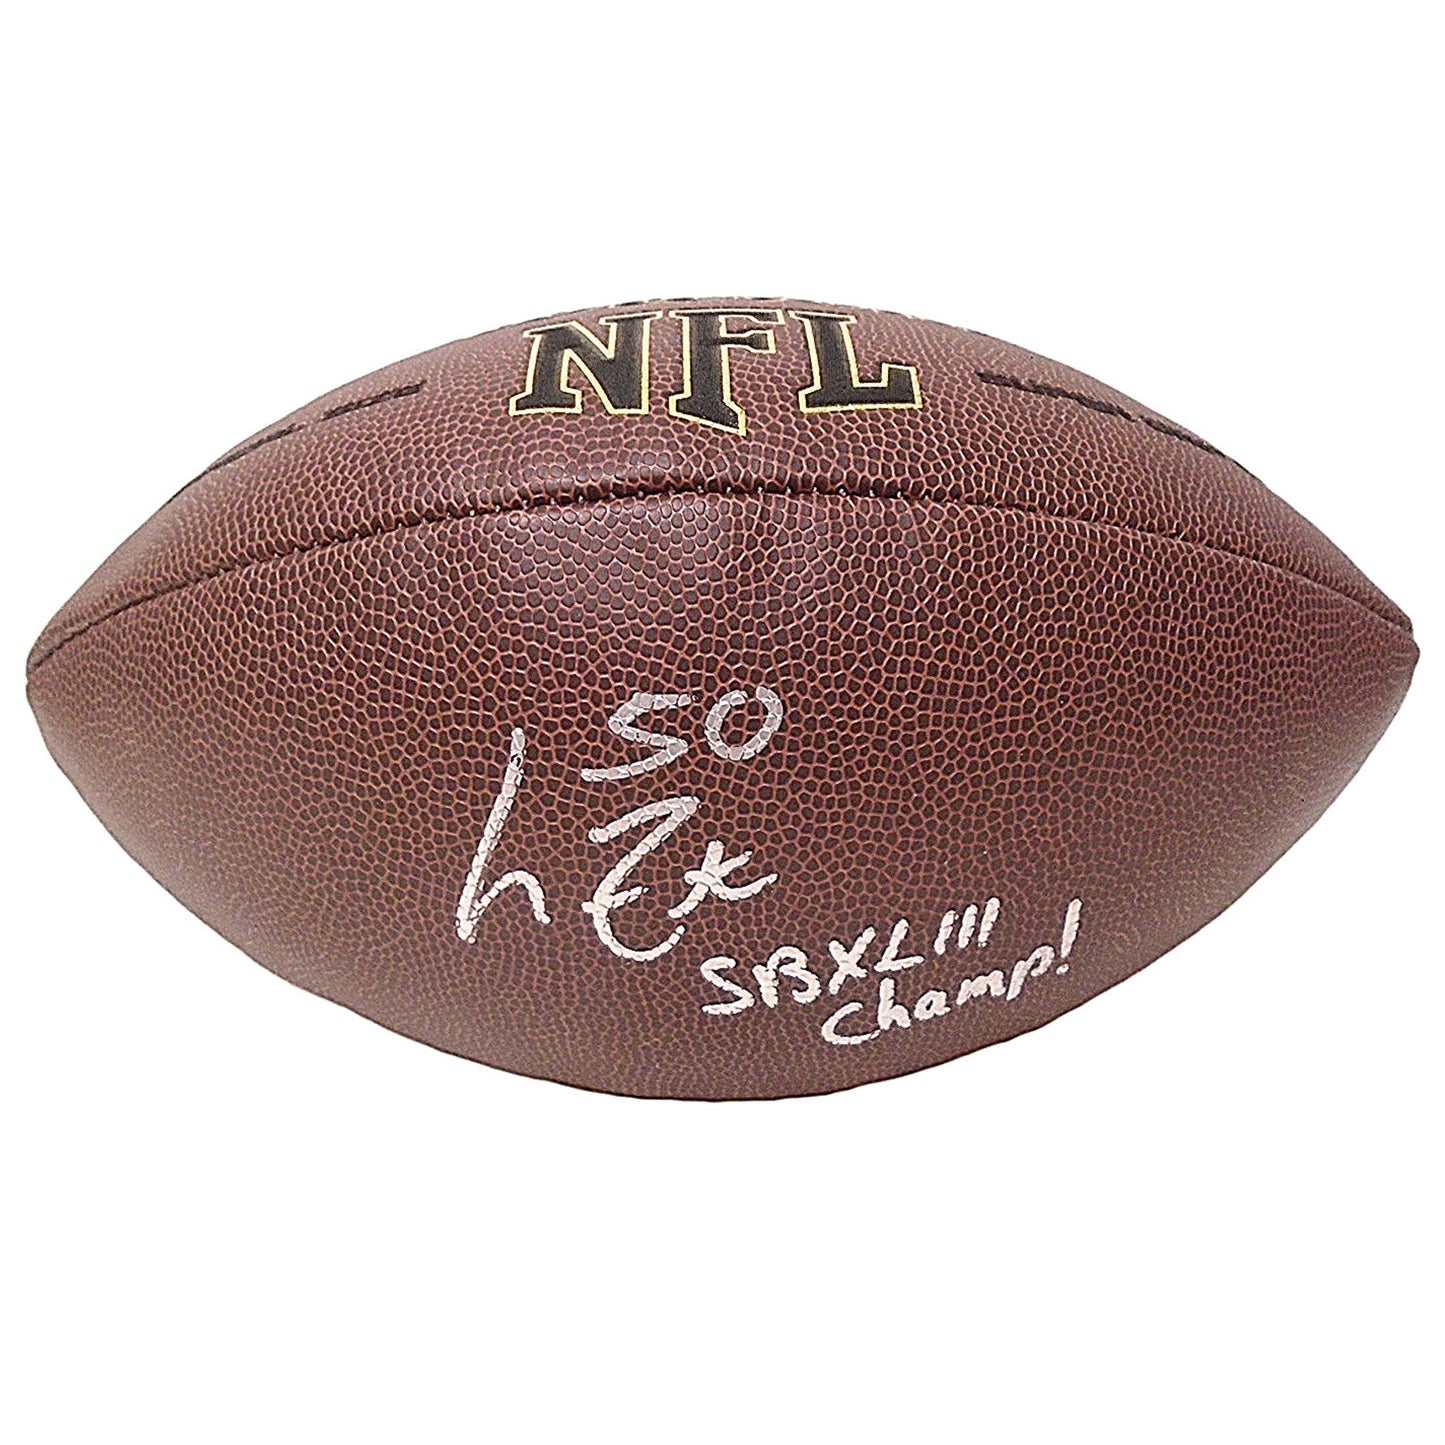 Footballs- Autographed- Larry Foote Signed NFL Wilson Composite Football - Pittsburgh Steelers - Proof Photo - Beckett BAS Authentication 102